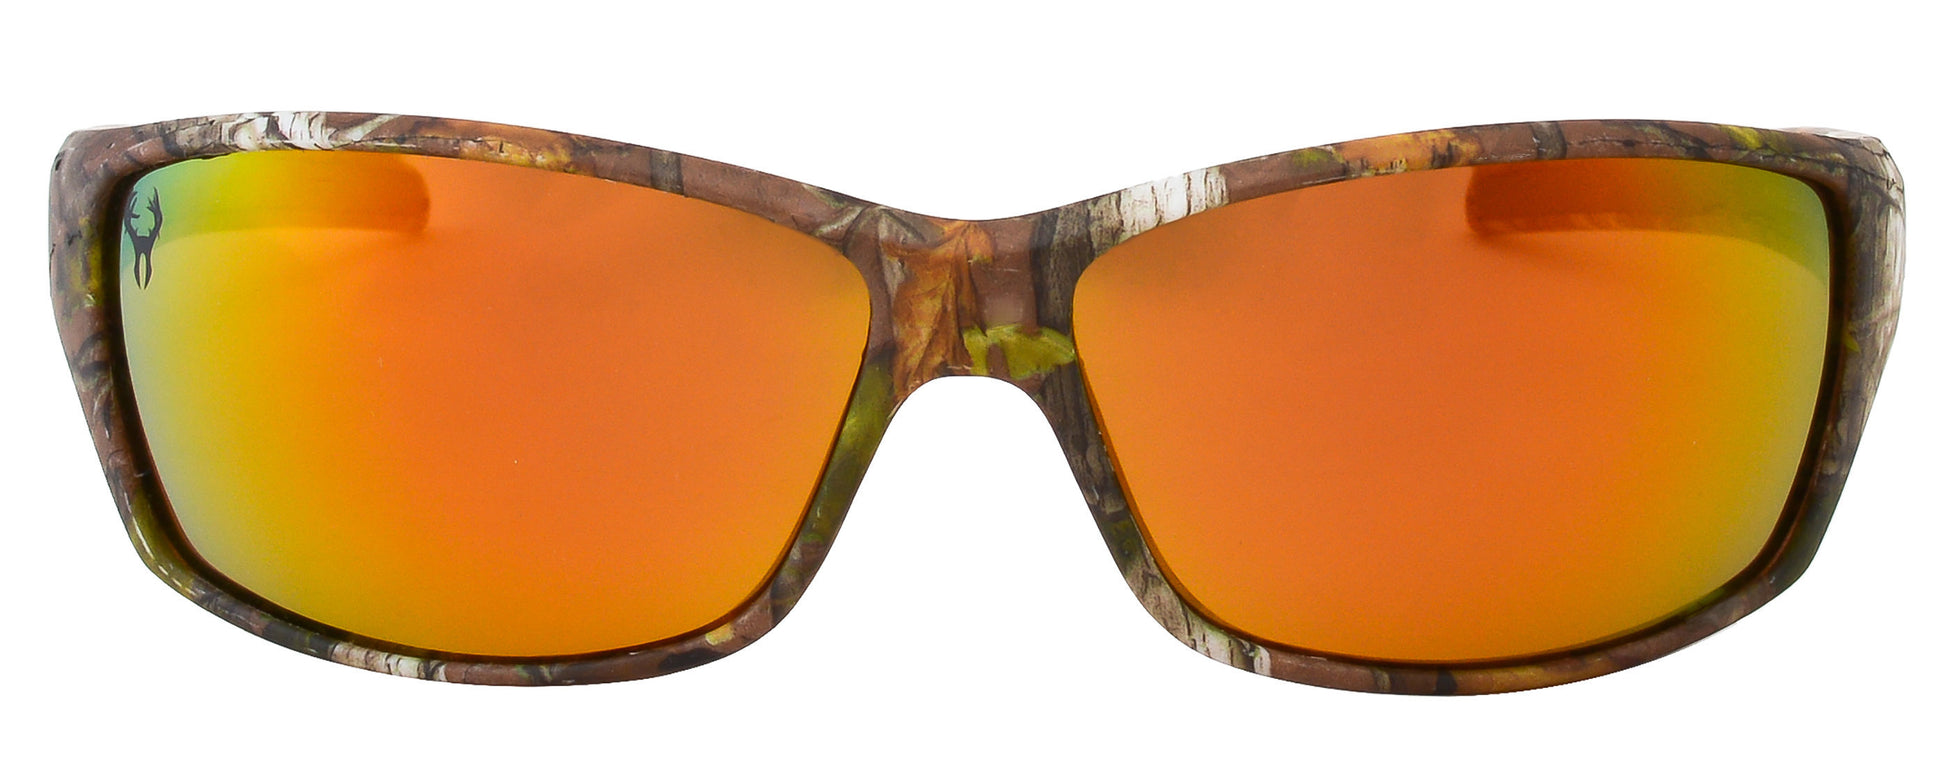 Third image: Hornz Brown Forest Camouflage Polarized Sunglasses for Men Full Frame & Free Matching Microfiber Pouch – Brown Camo Frame – Orange Lens